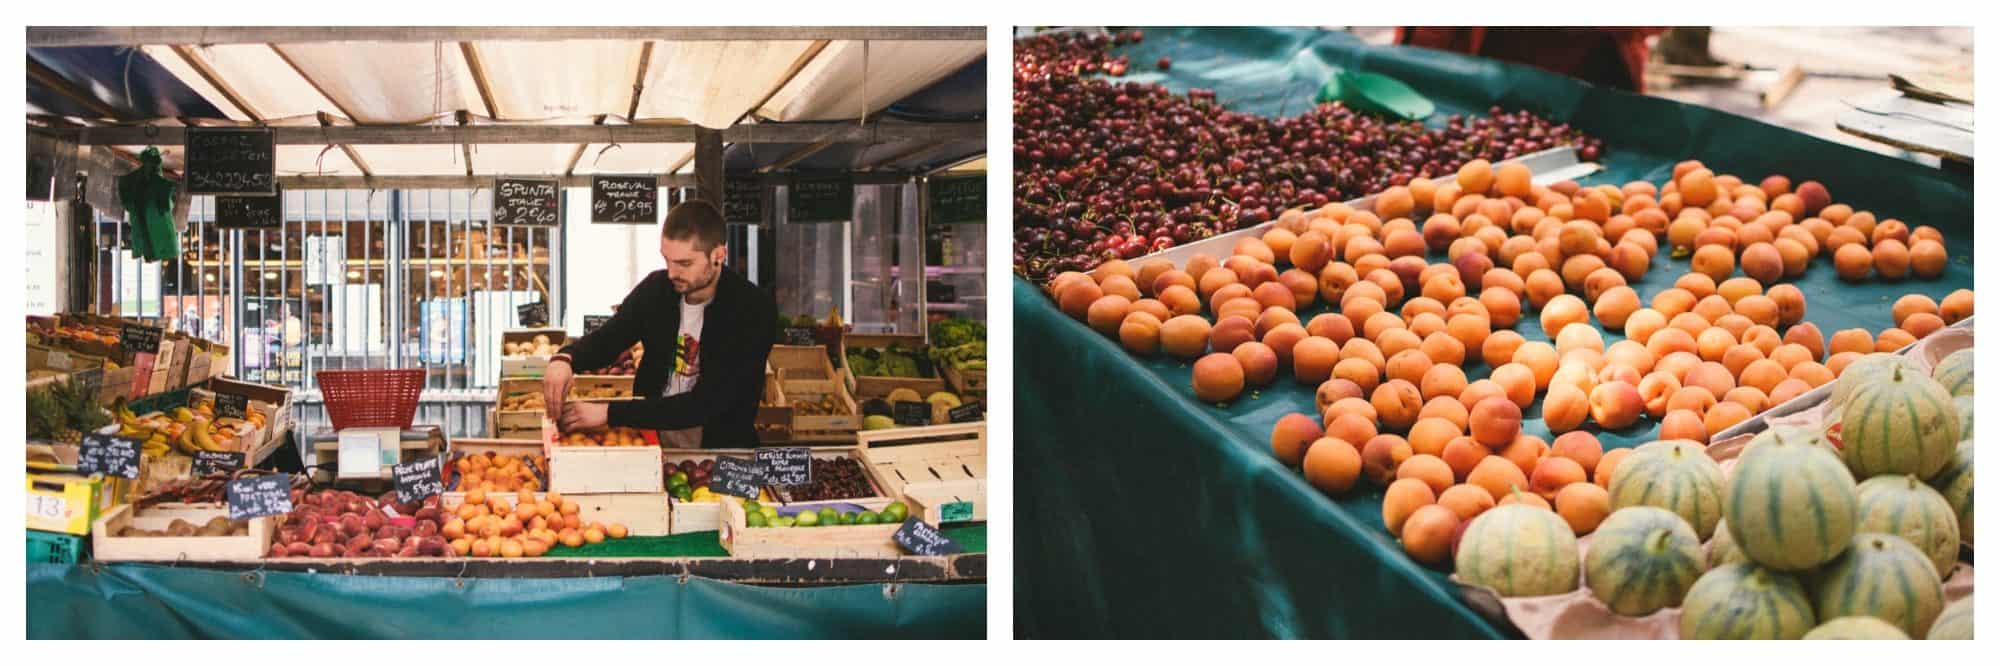 A stall vendor sorting out the crates of fruit on his stall at the Bastille market in Paris (left). A stall selling summer fruit like cherries, apricots and melon  (right).